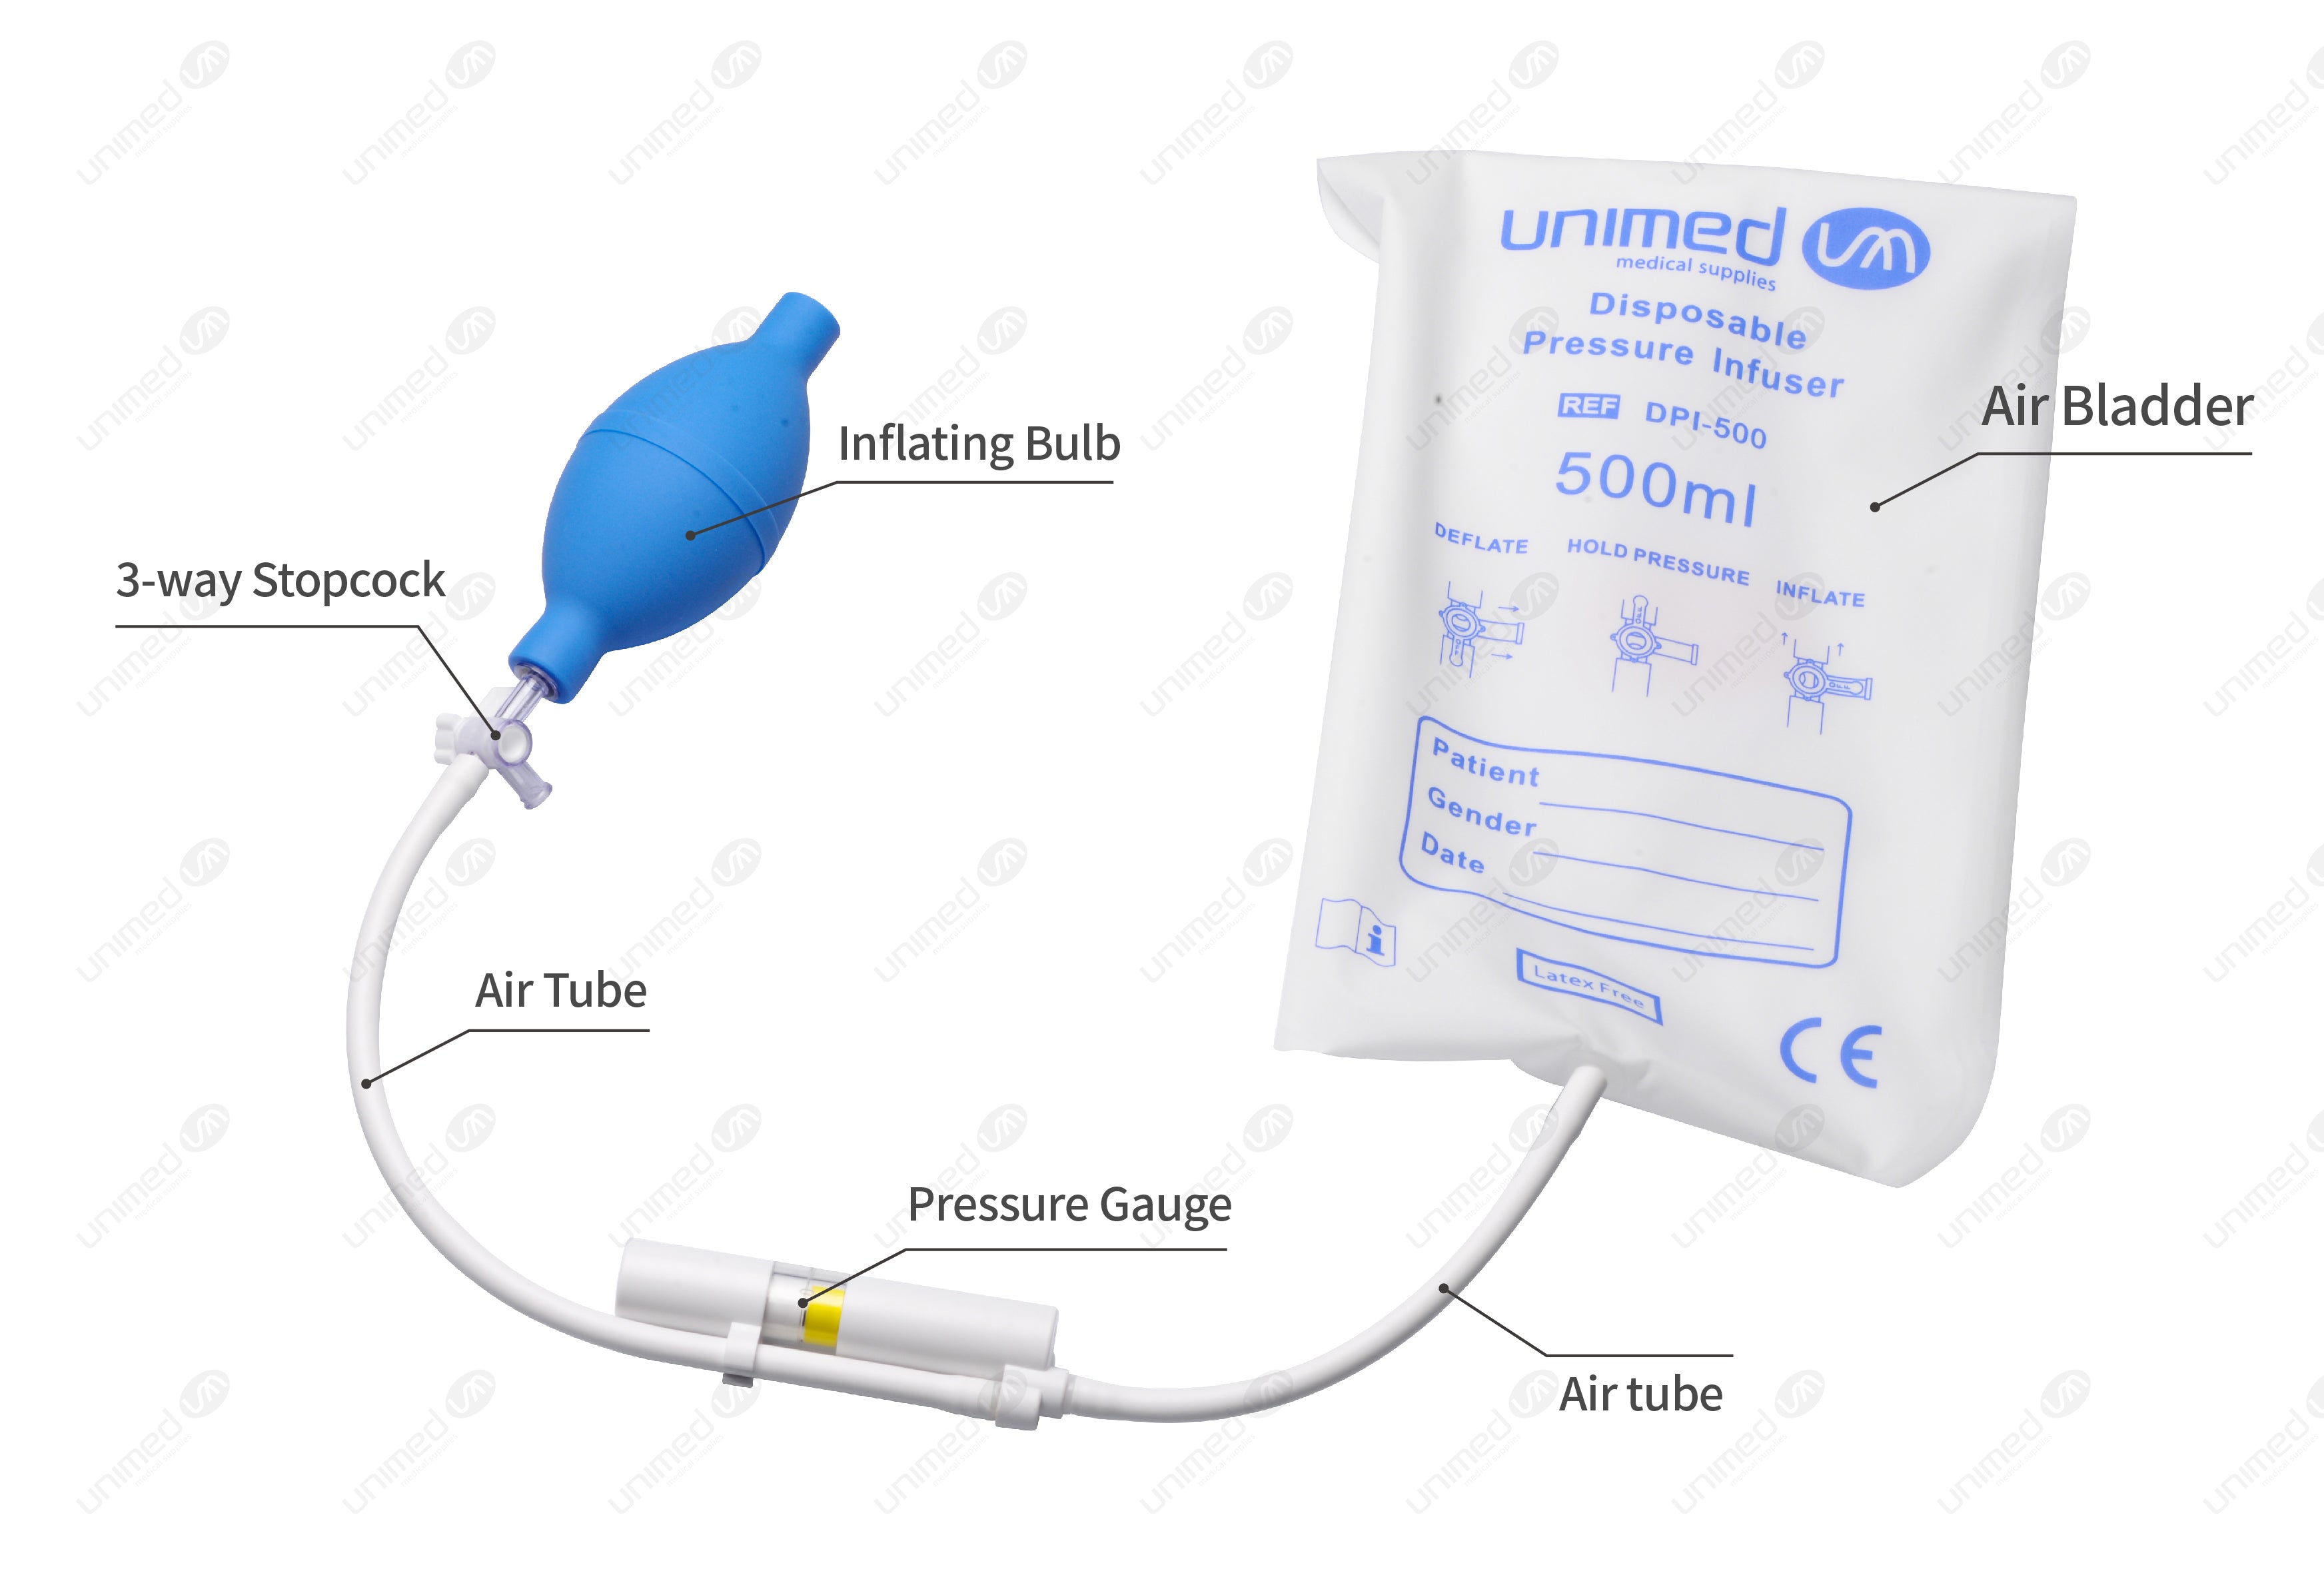 Are Pressure Bags Really Our Best Option for Rapid Fluid Delivery?